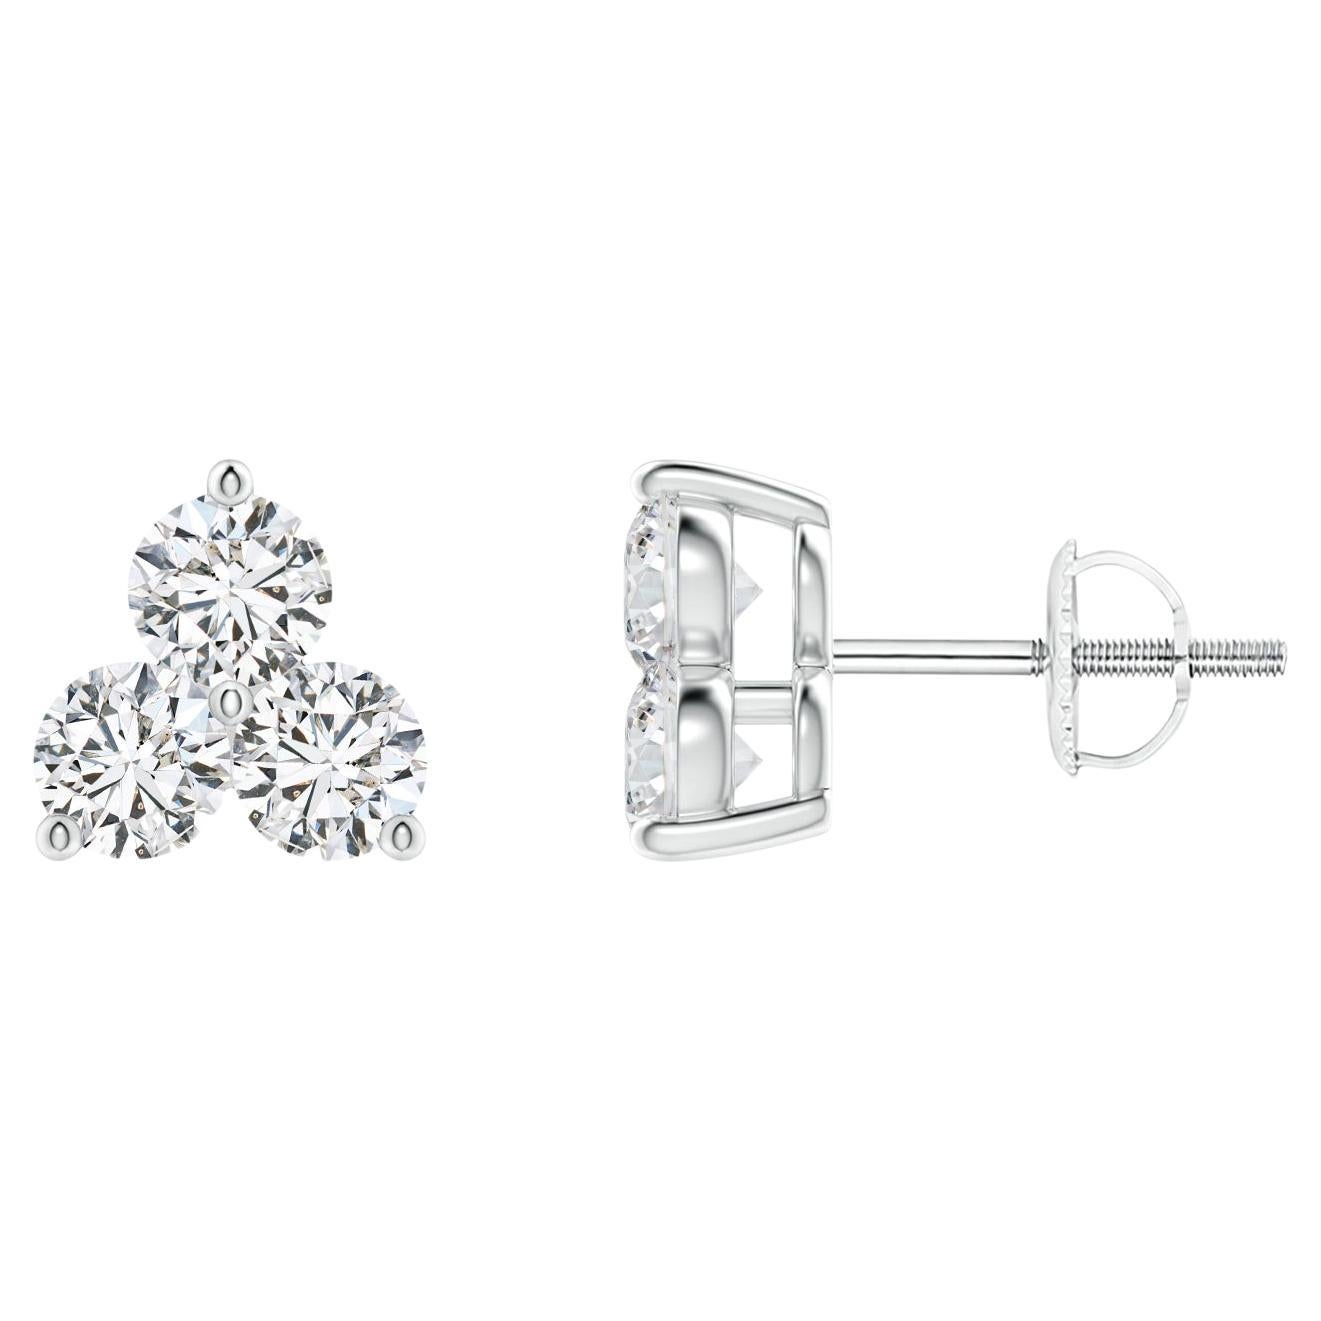 Natural Diamond Stud Earrings in 14K White Gold (0.5cttw Color-H  Clarity-SI2)